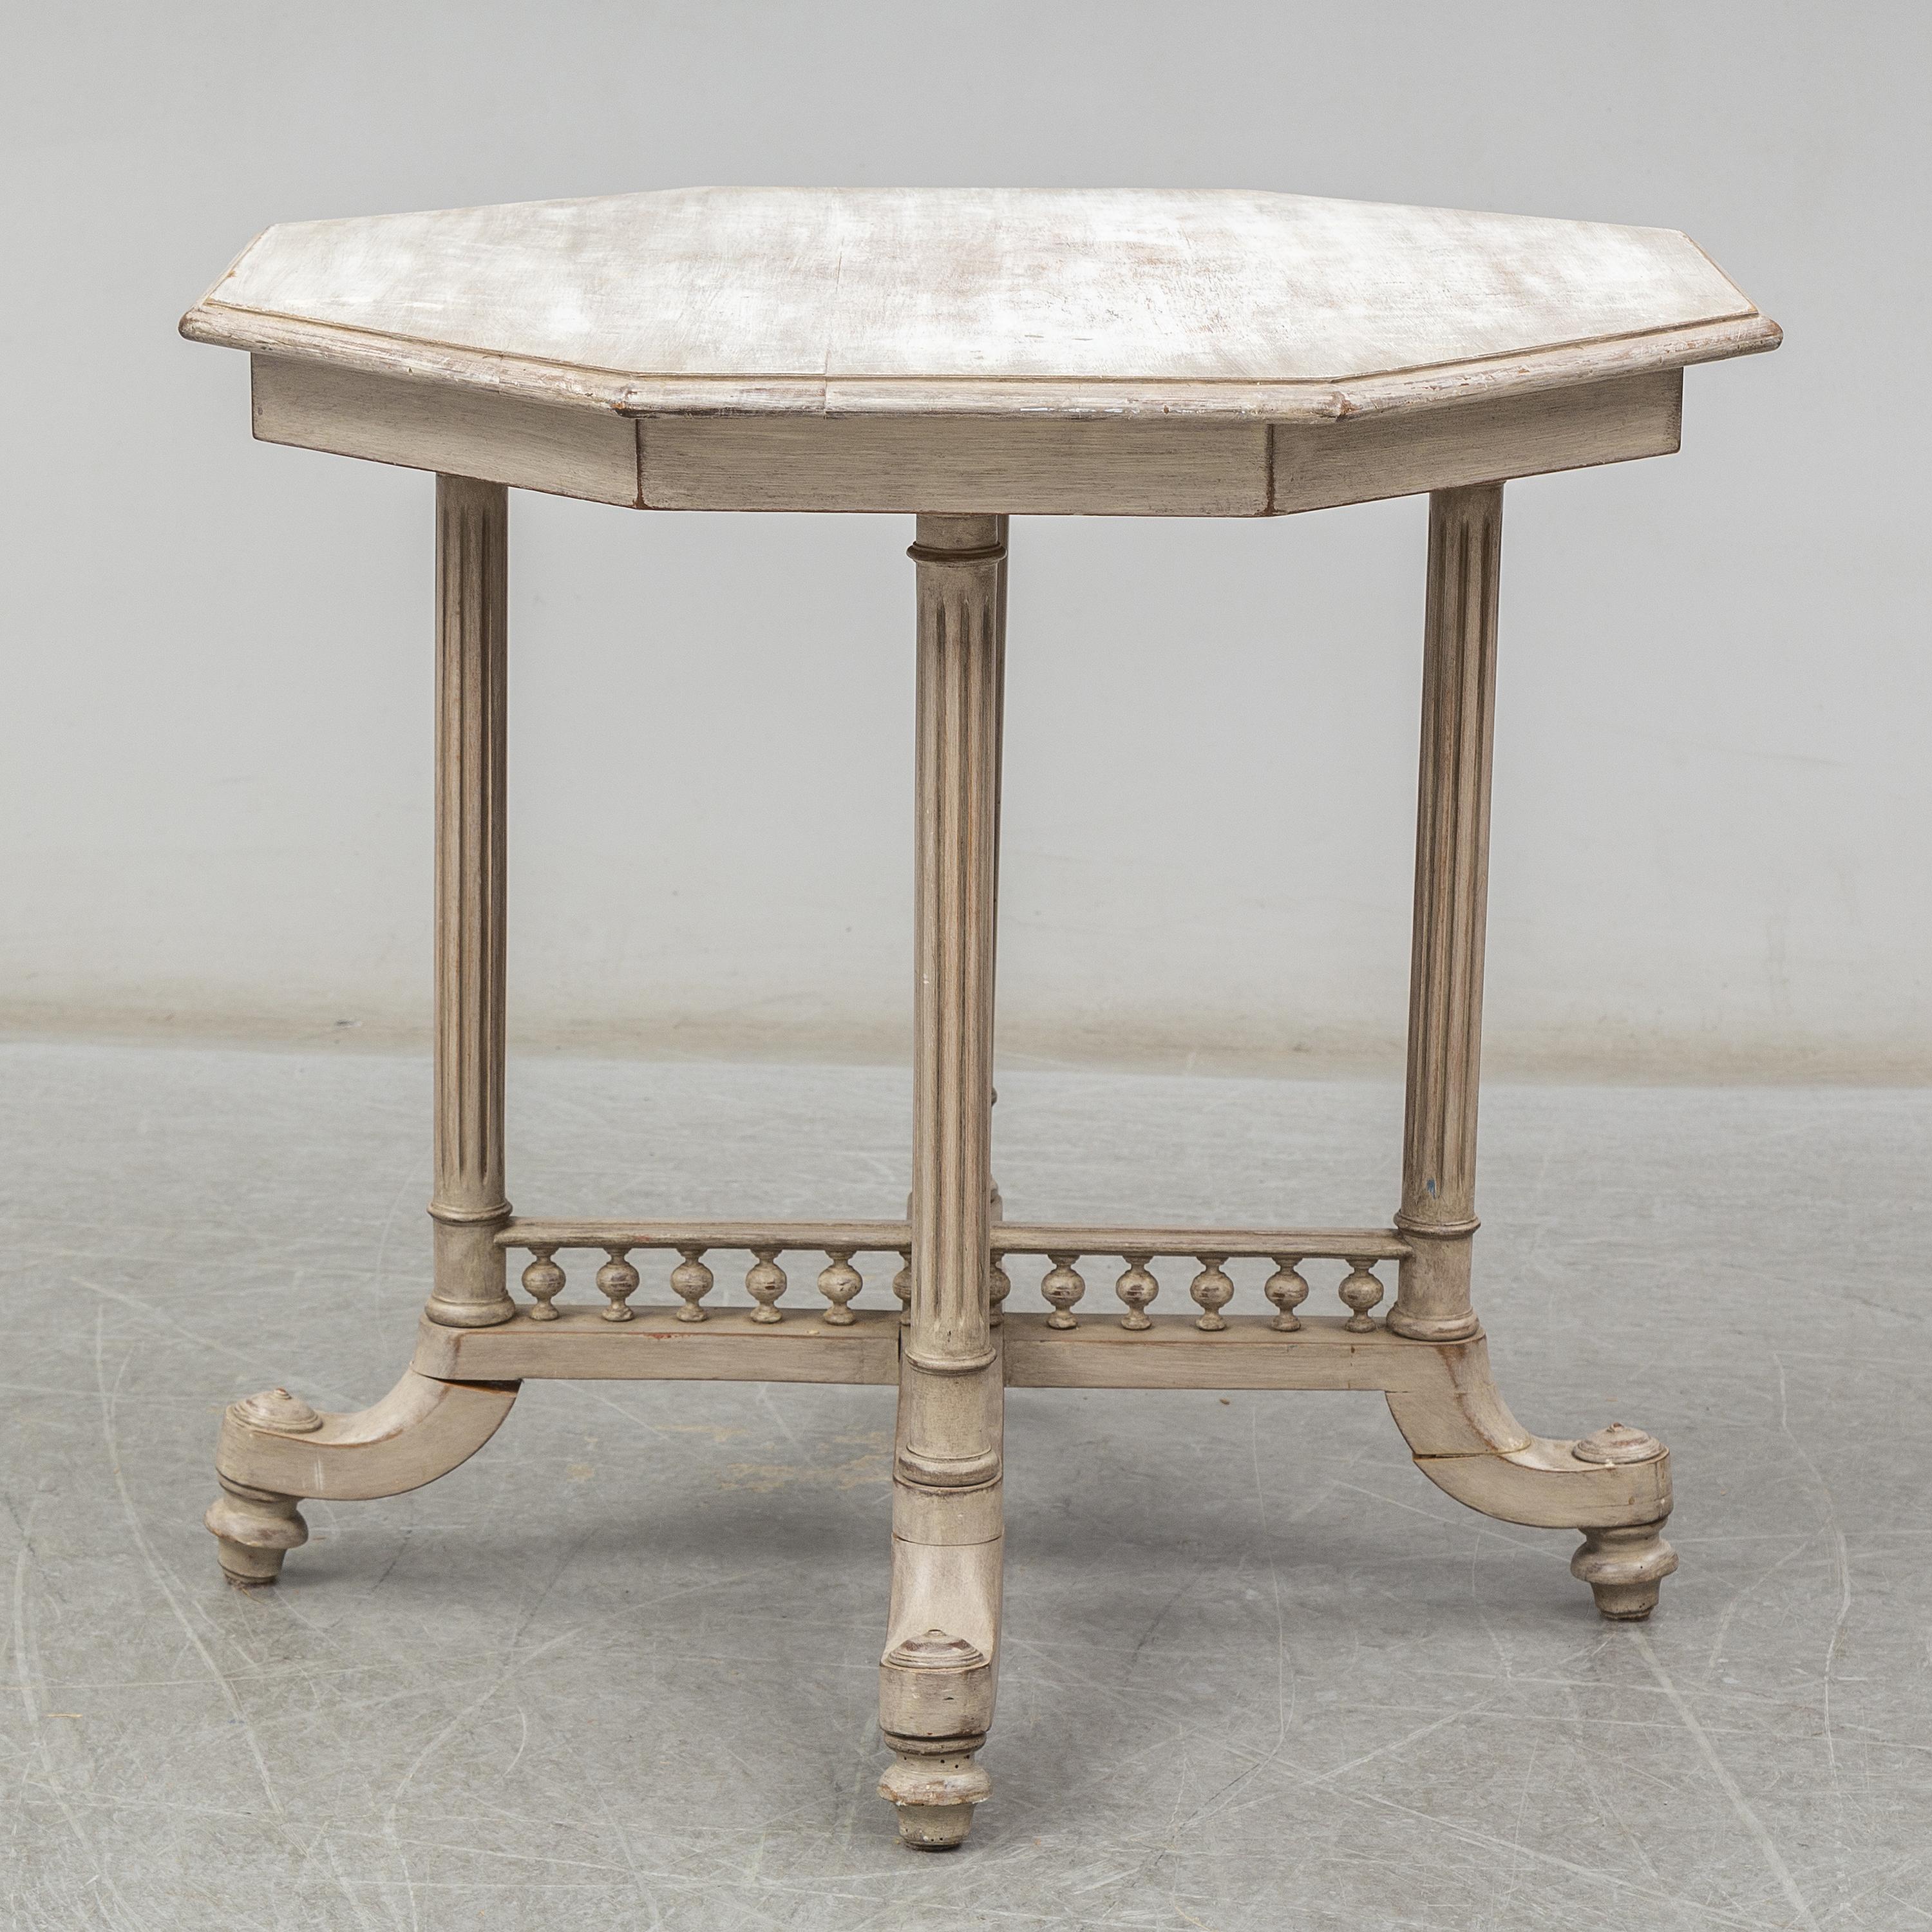 A painted Gustavian table from Sweden, second half of the 19th century.
Later painting with beautiful patina. Stain on top, feet have been repaired. Last image shows leg before repair.